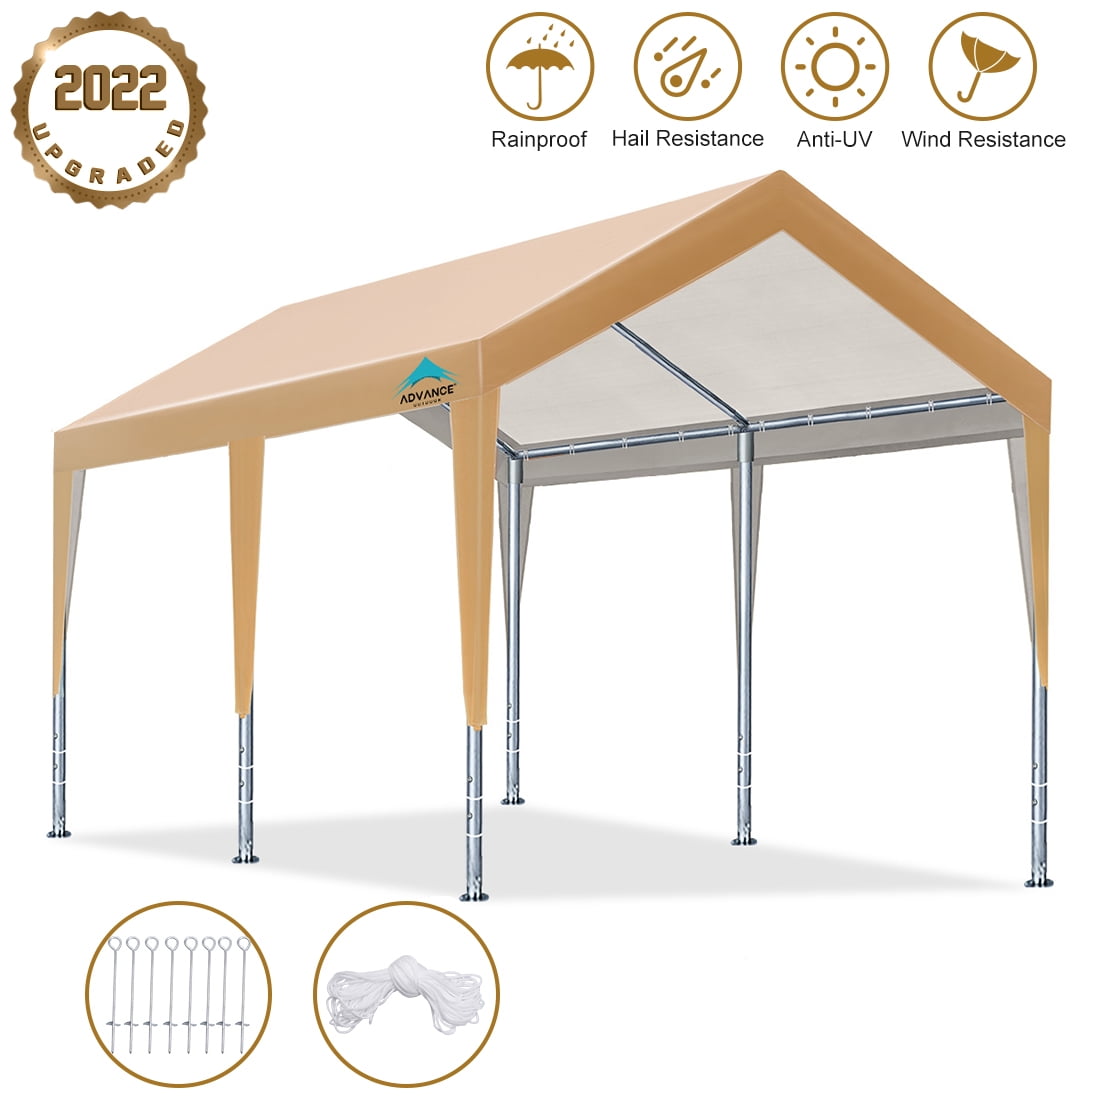 10x20 Heavy Duty Party Tent Carport Outdoors Metal Garage Shelter Weeding Tent 